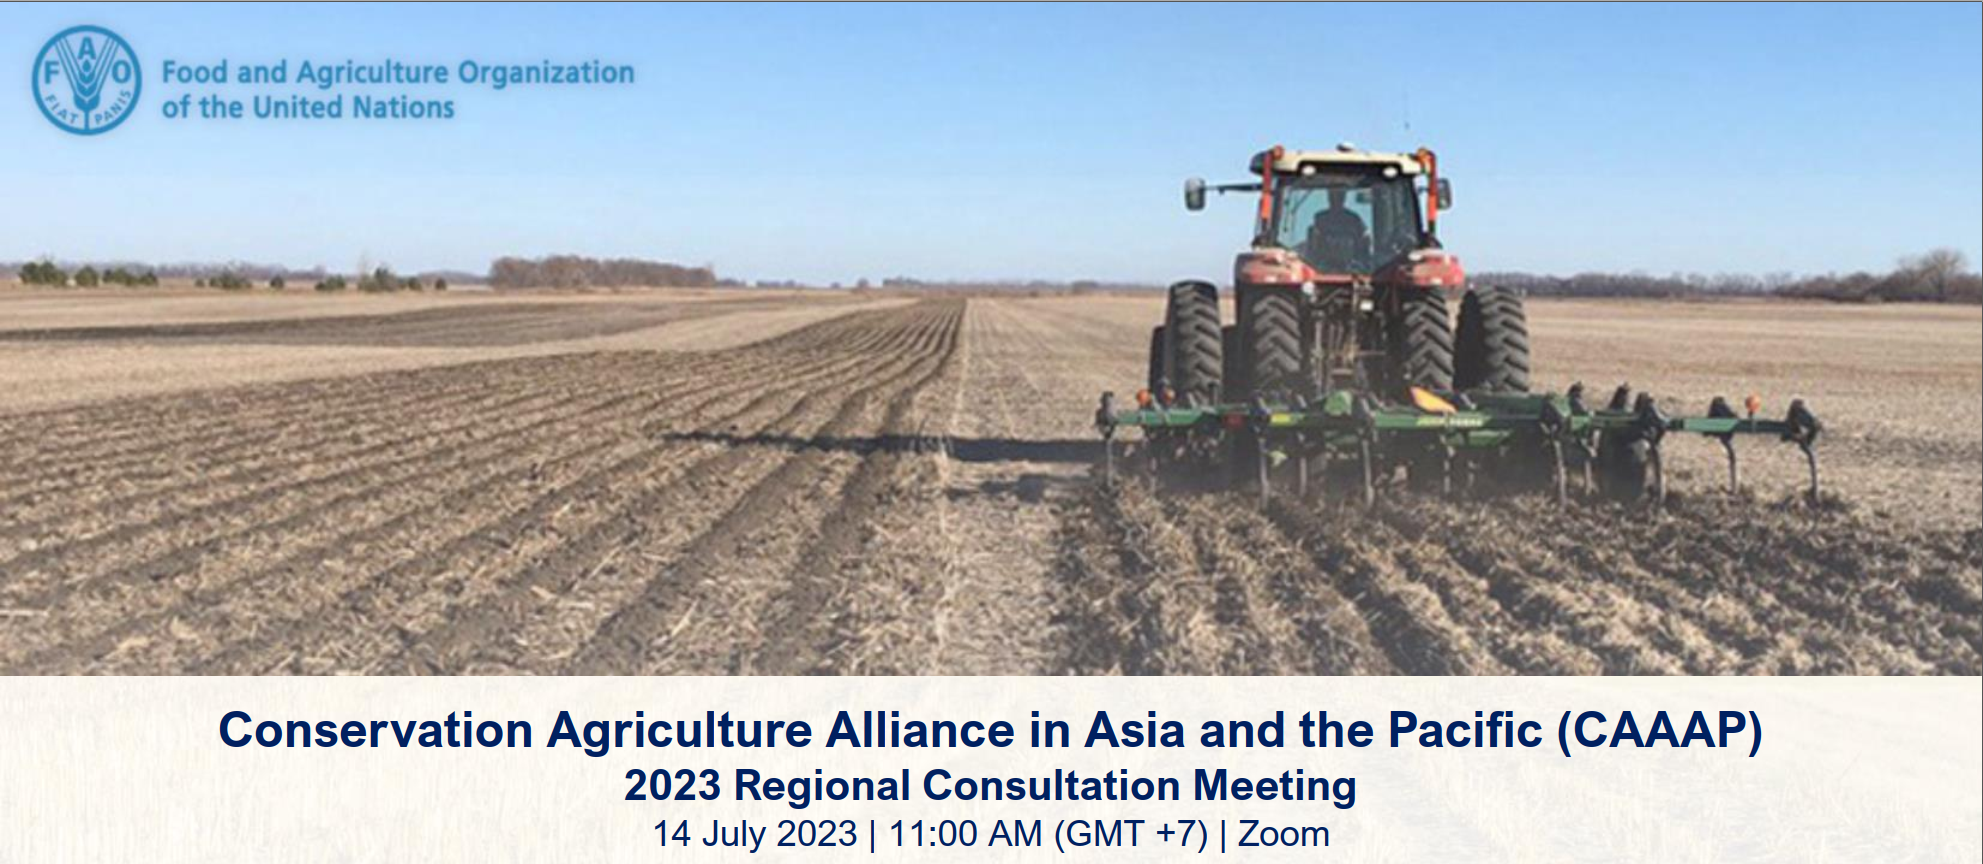 Conservation Agriculture Alliance in Asia and the Pacific (CAAAP) 2023 Regional Consultation Meeting will be held.